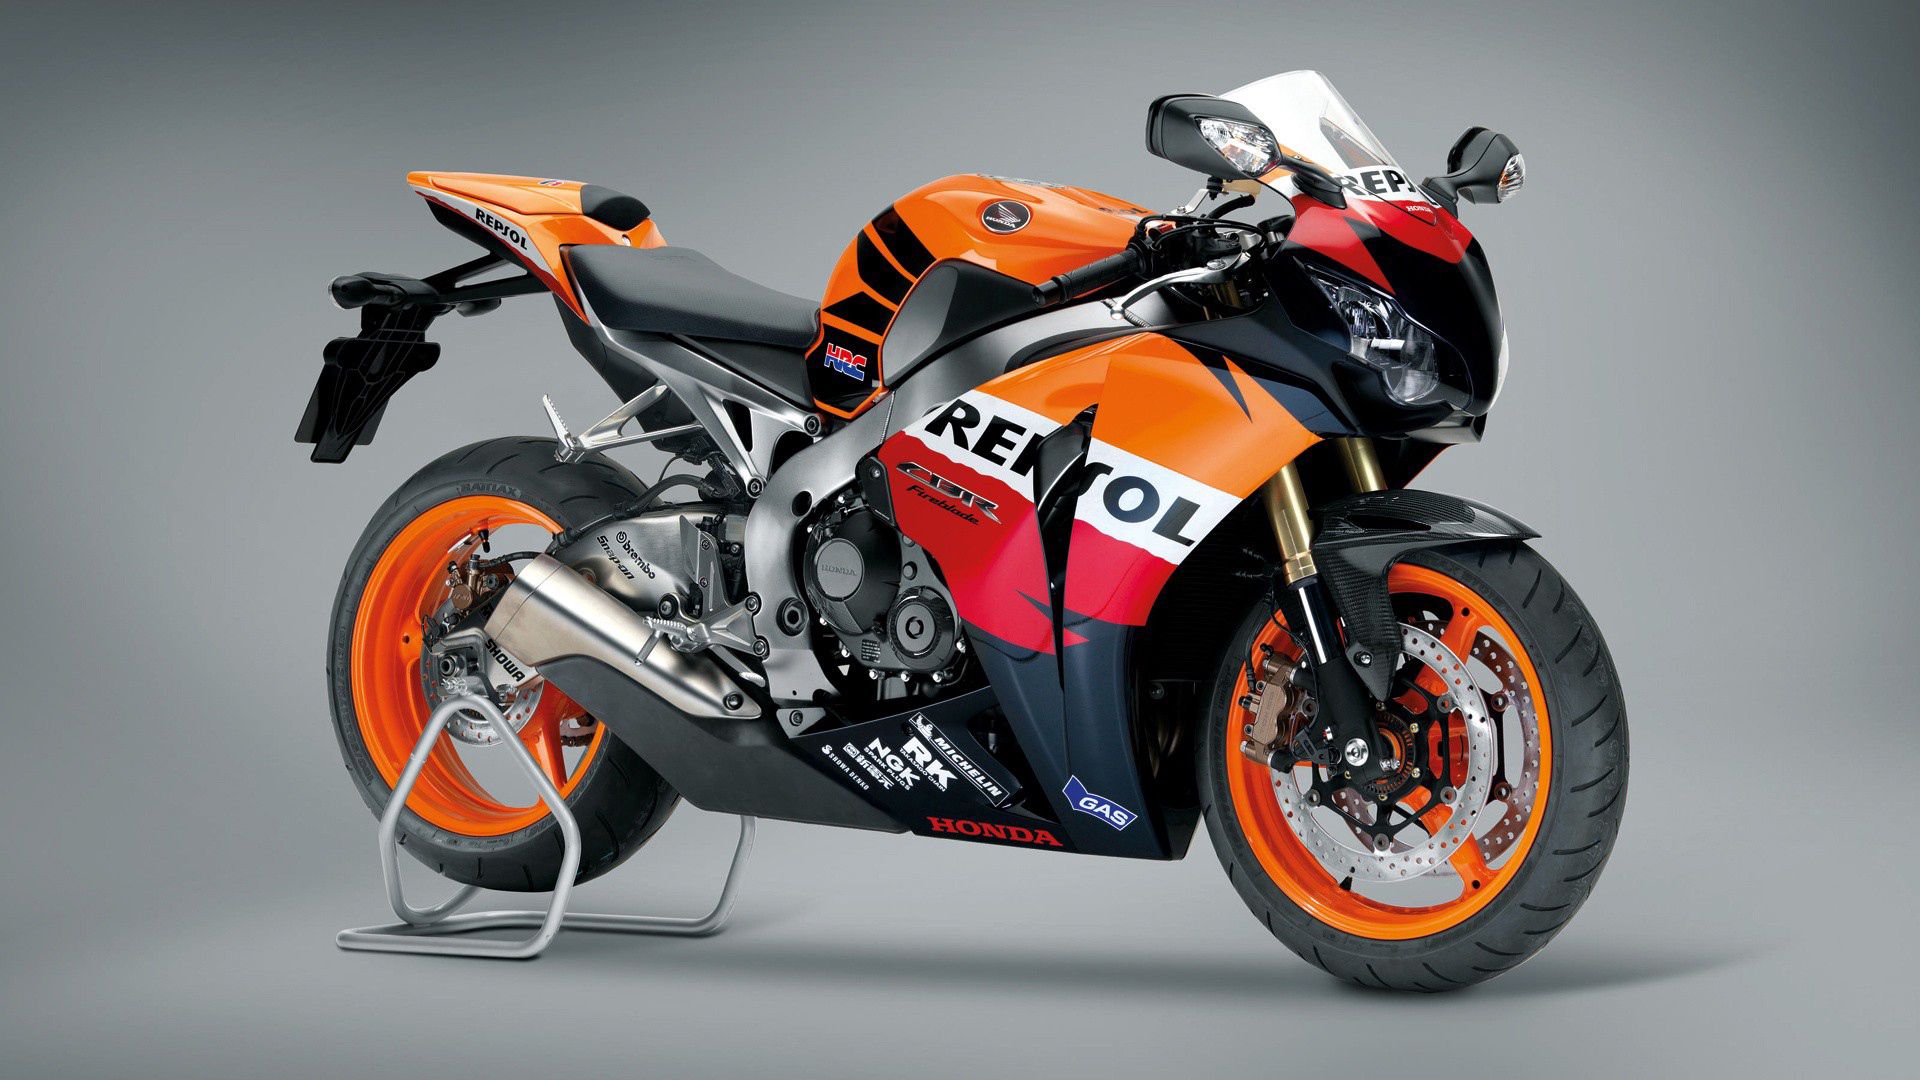 side view, honda, motorcycles, motorcycle, repsol cellphone